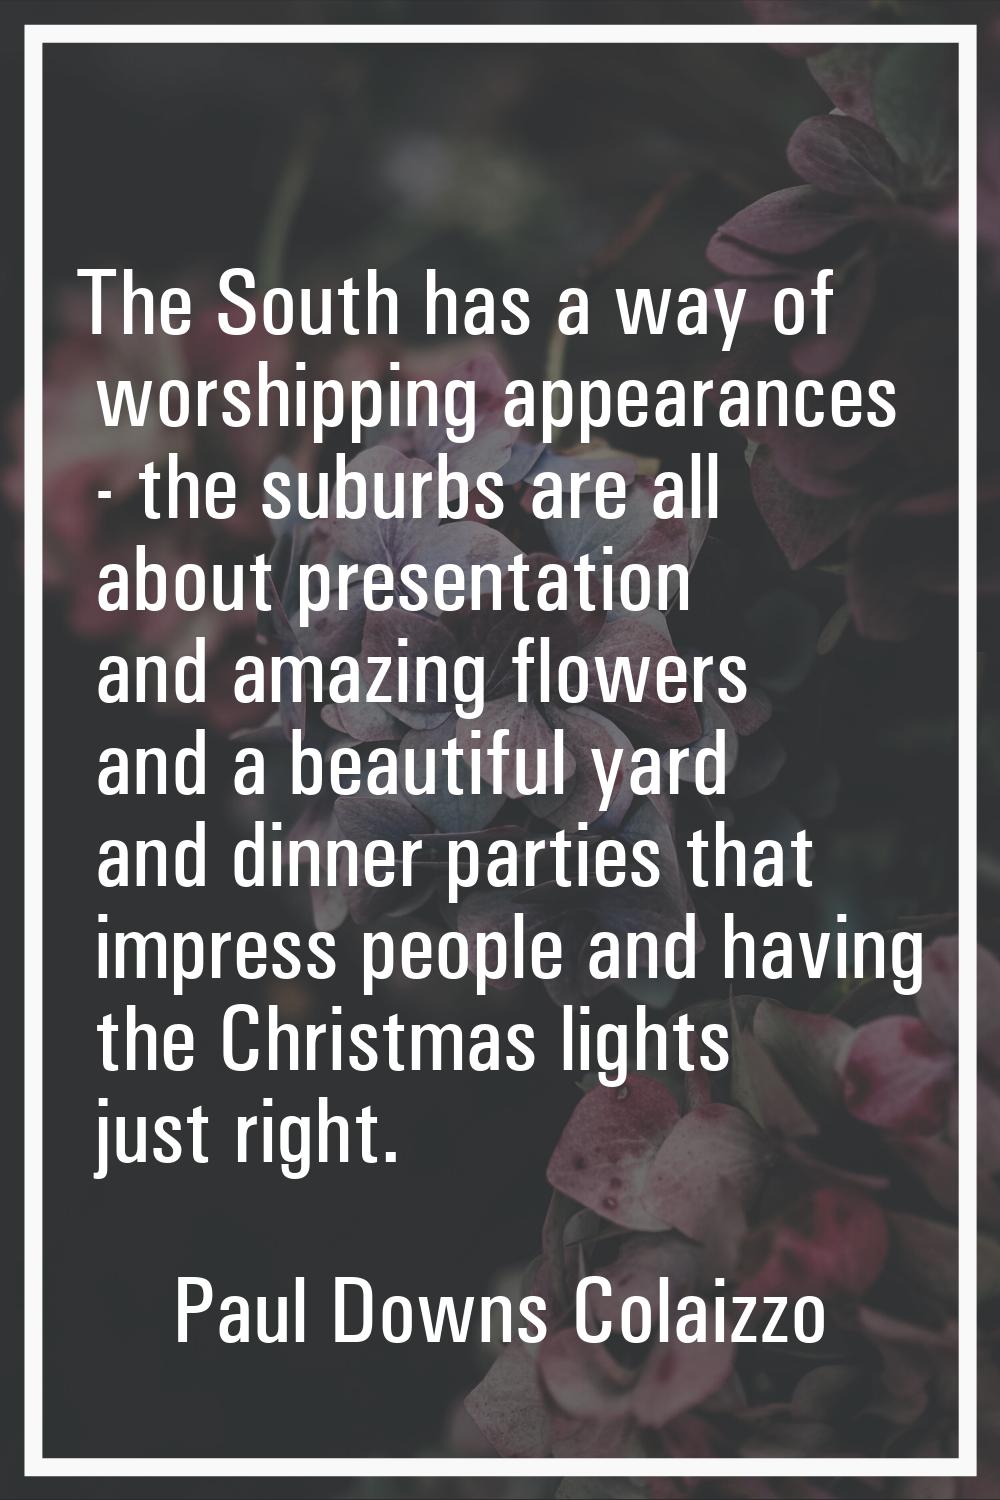 The South has a way of worshipping appearances - the suburbs are all about presentation and amazing